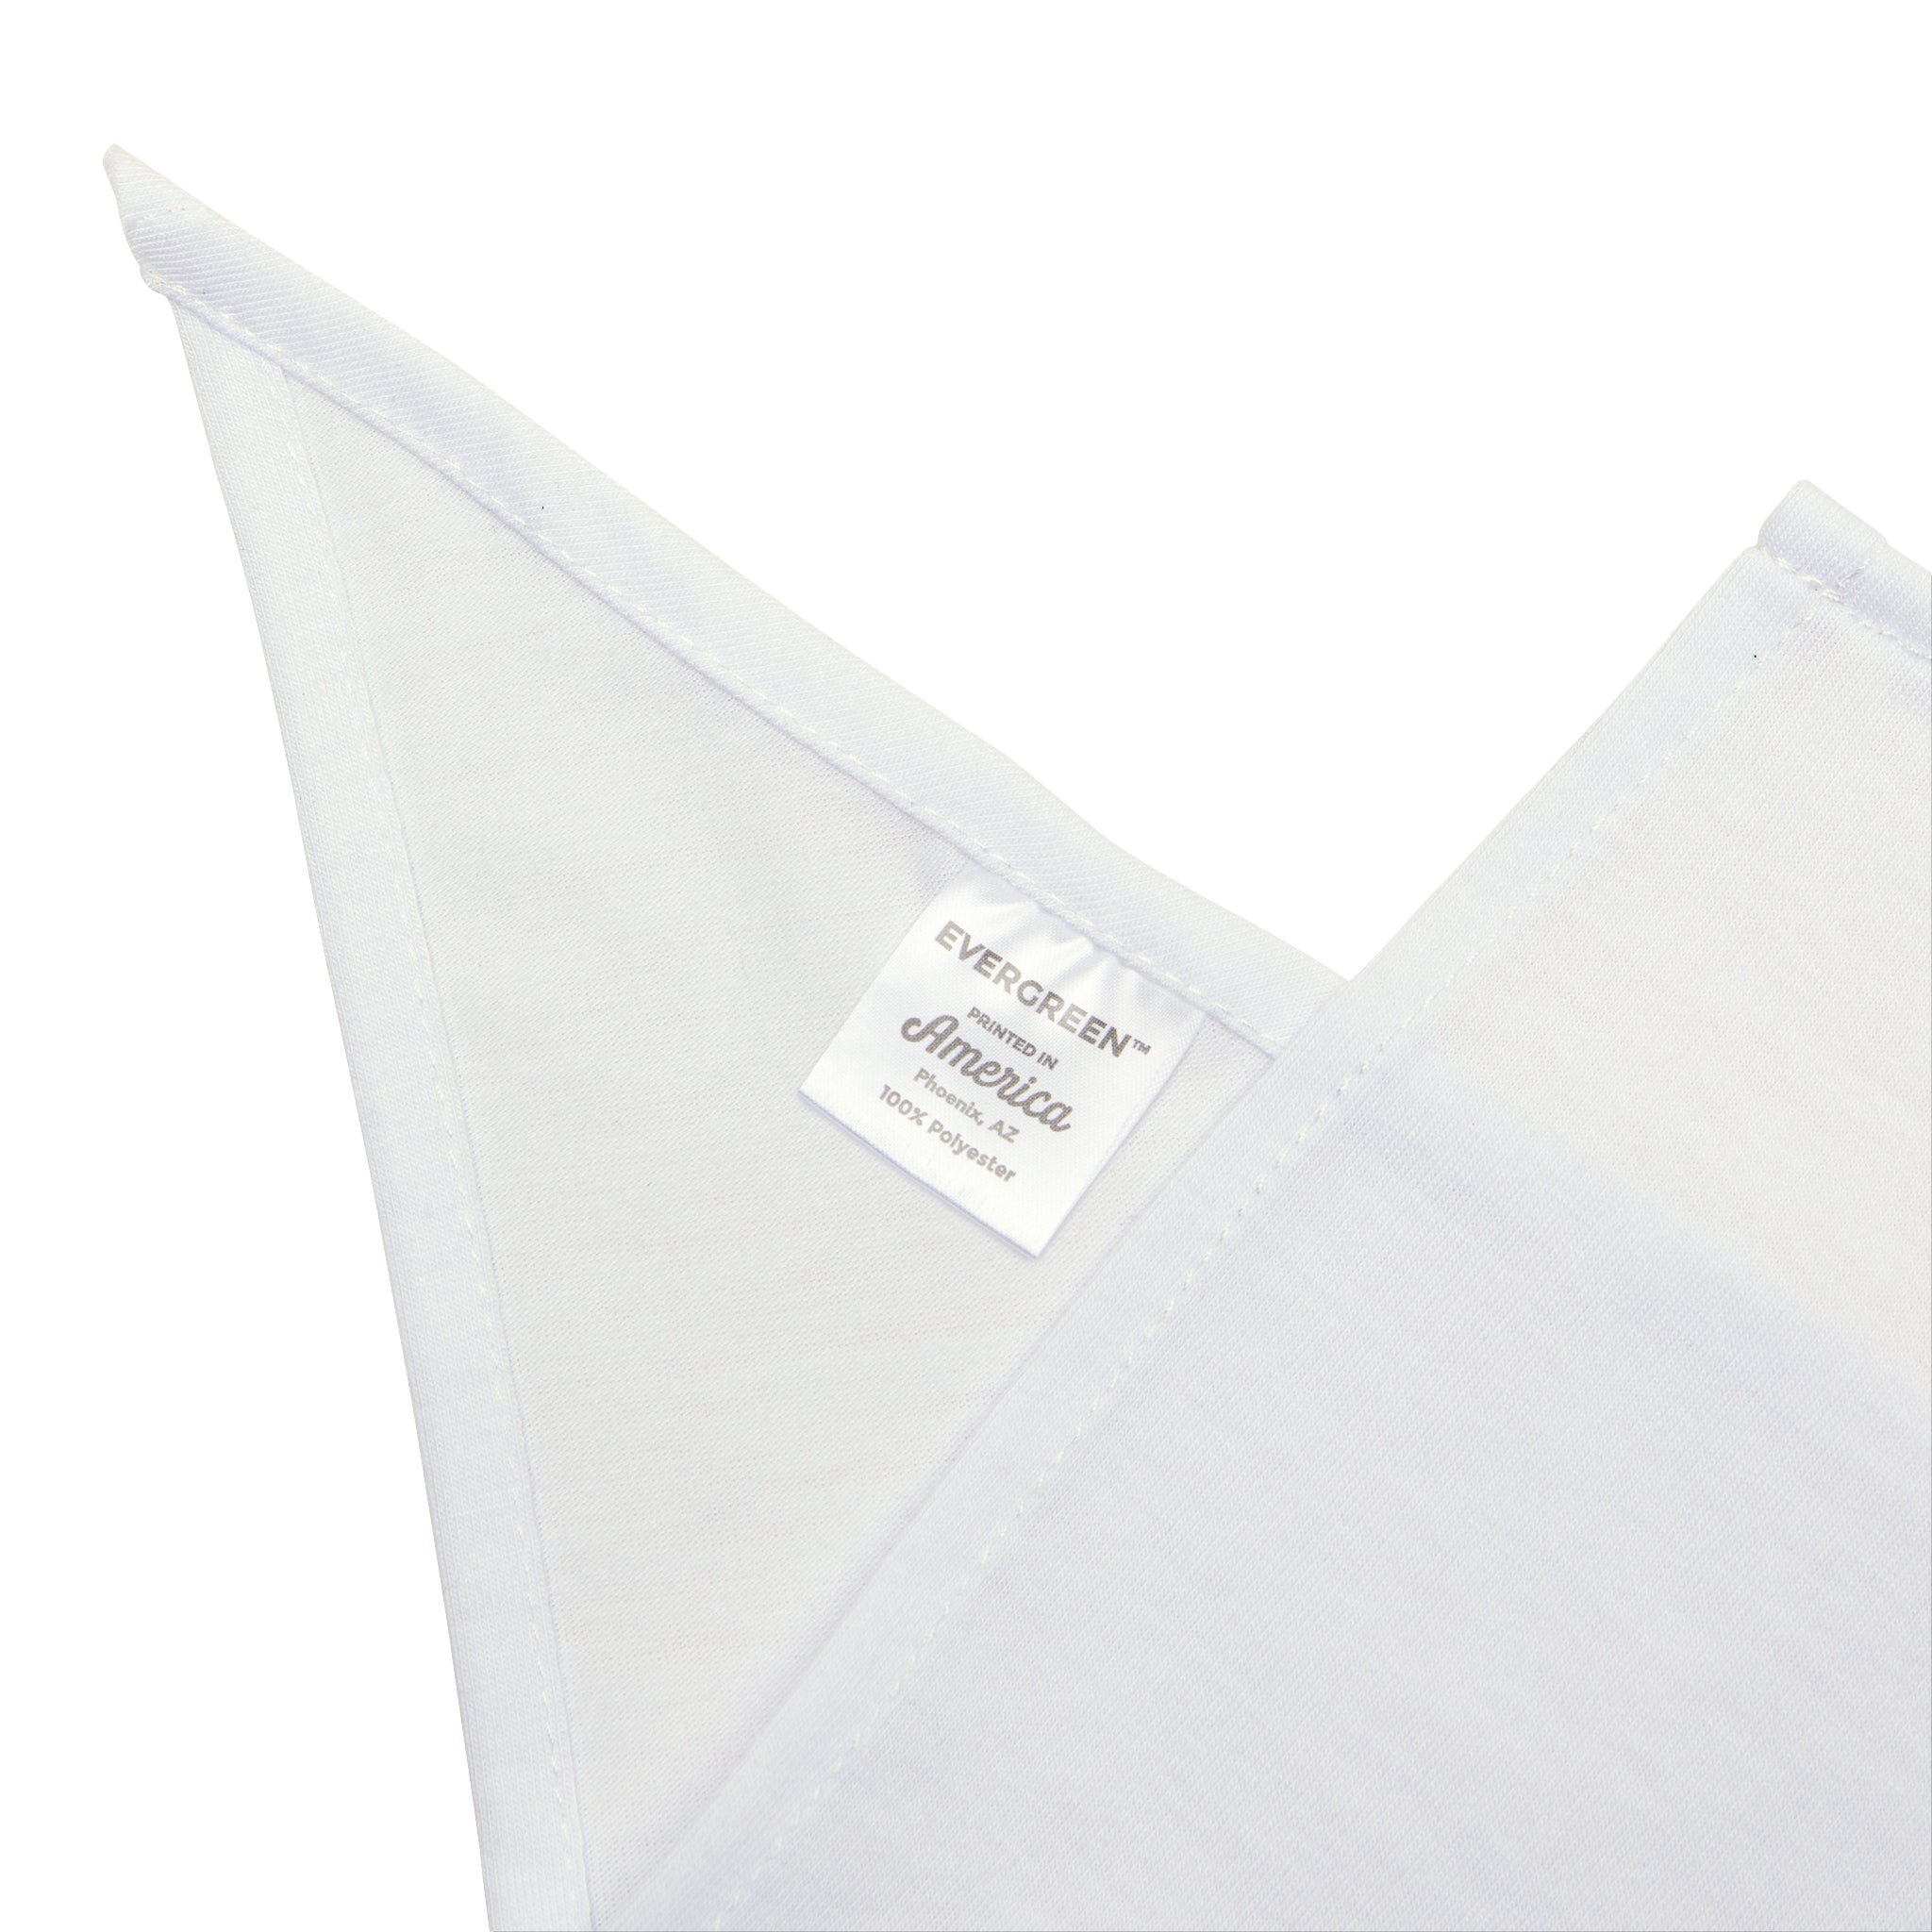 Close-up of a white fabric tag attached to a white cloth, labeled "Ge-Ni-U-S - Pet Bandana 100% polyester." The tag is visible between two white triangular folds of the cloth, ensuring irritation-free wear.